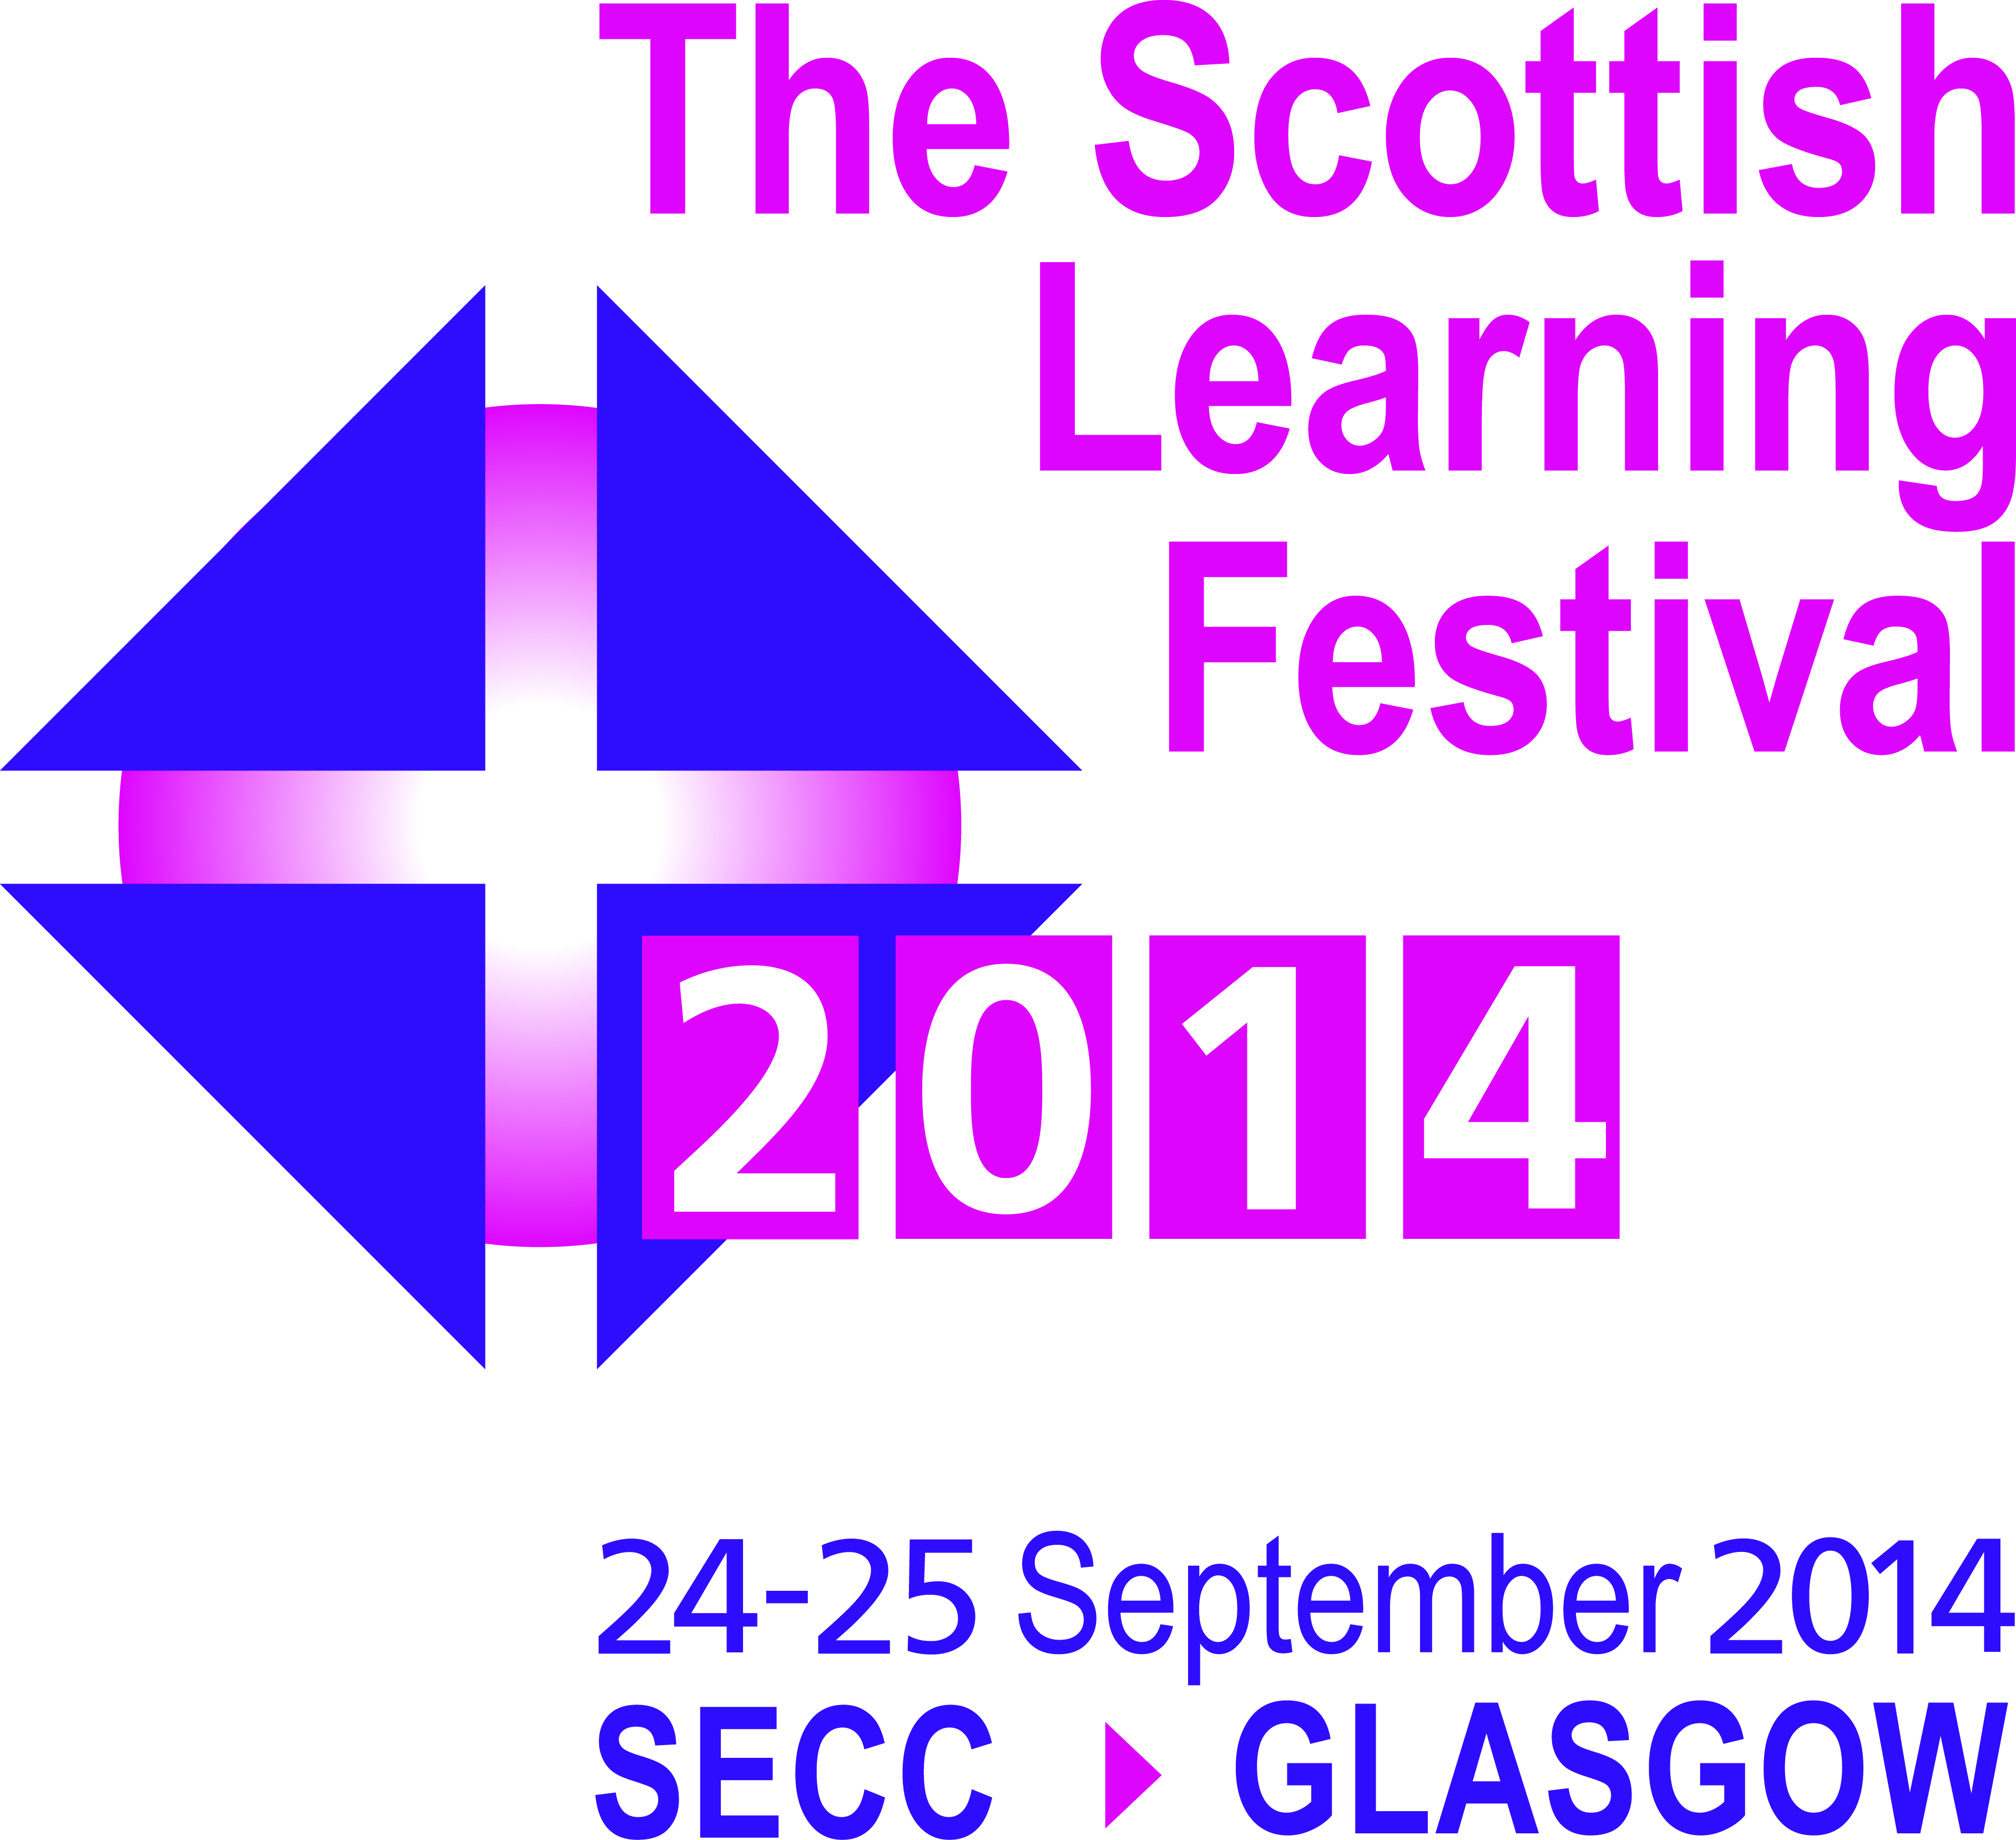 Raising achievement and attainment for all at the Scottish Learning Festival 2014